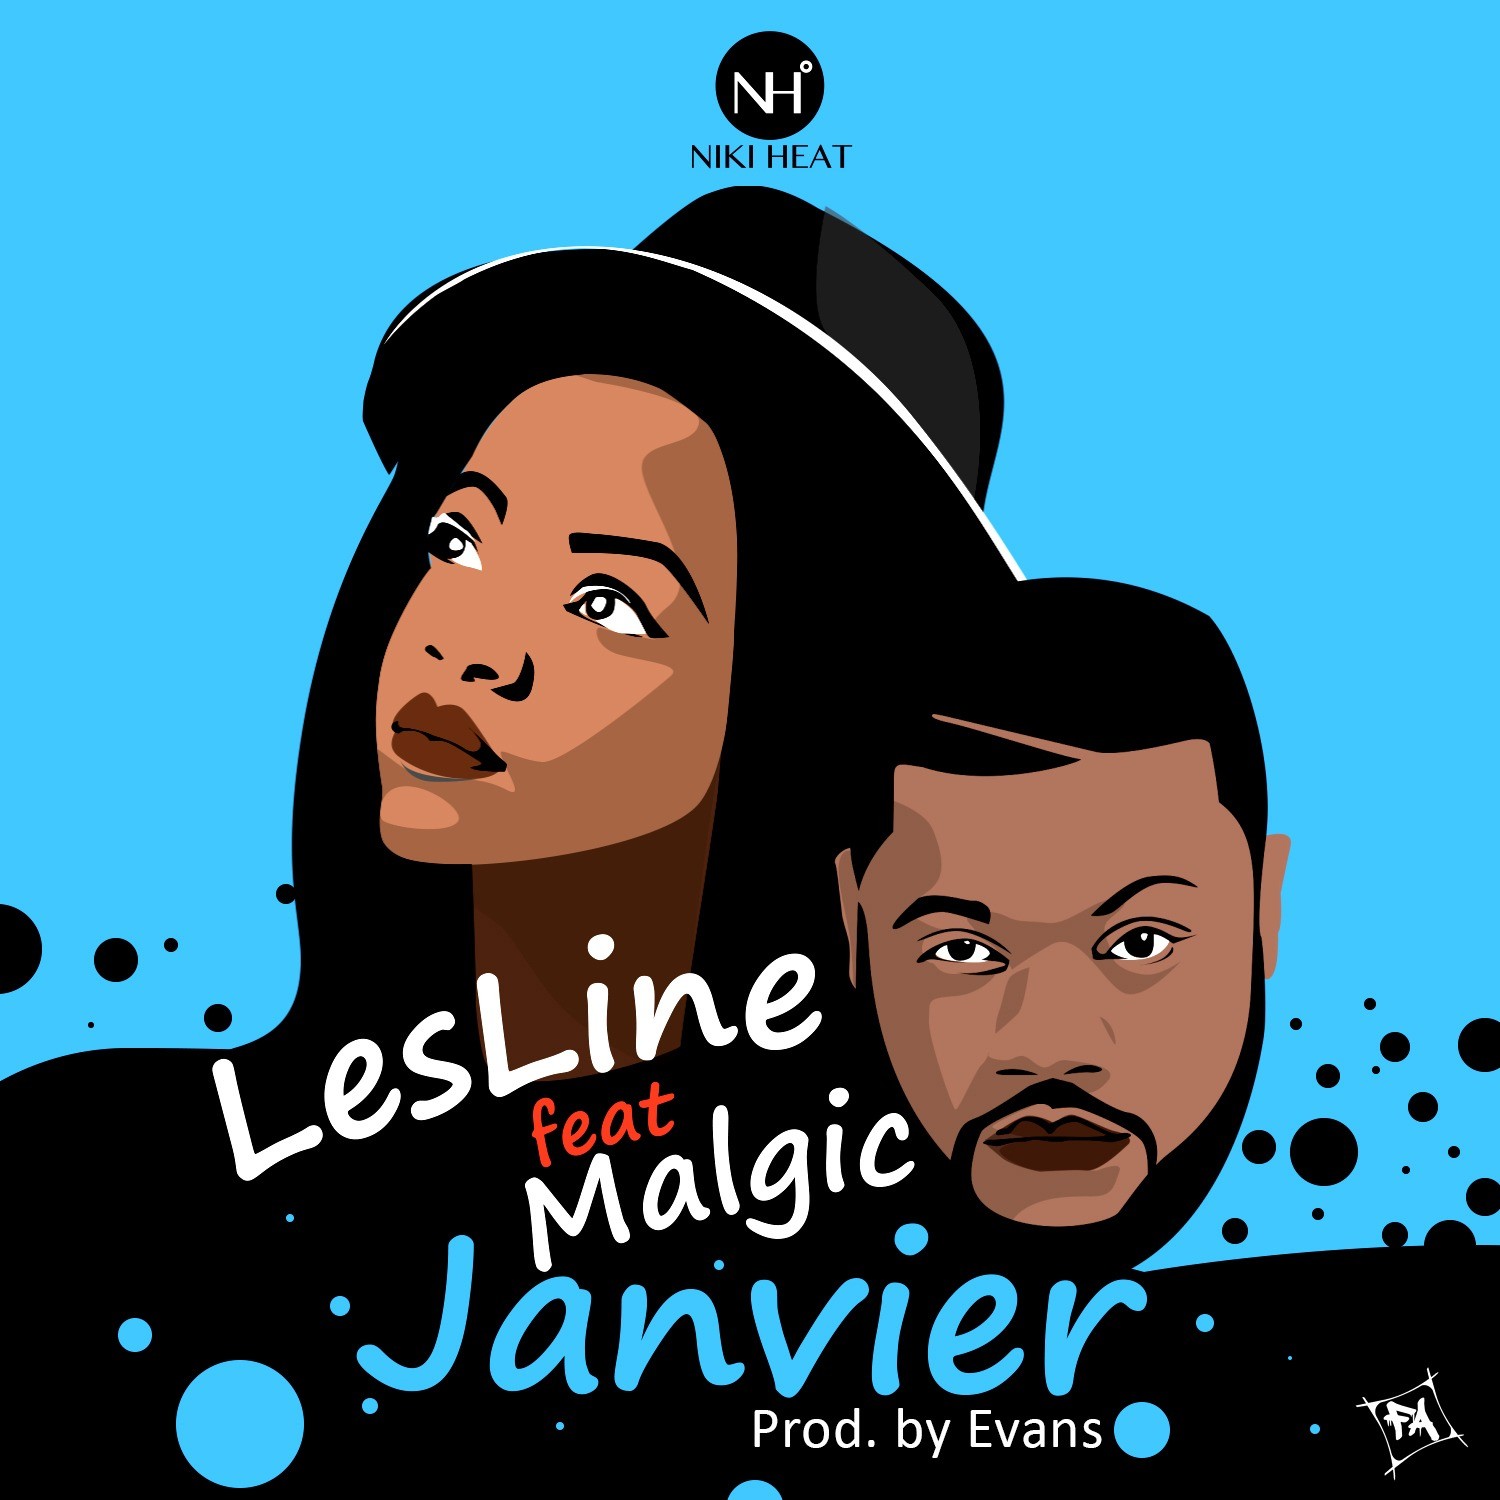 LesLine Releases New Single Titled Janvier Featuring Malgic